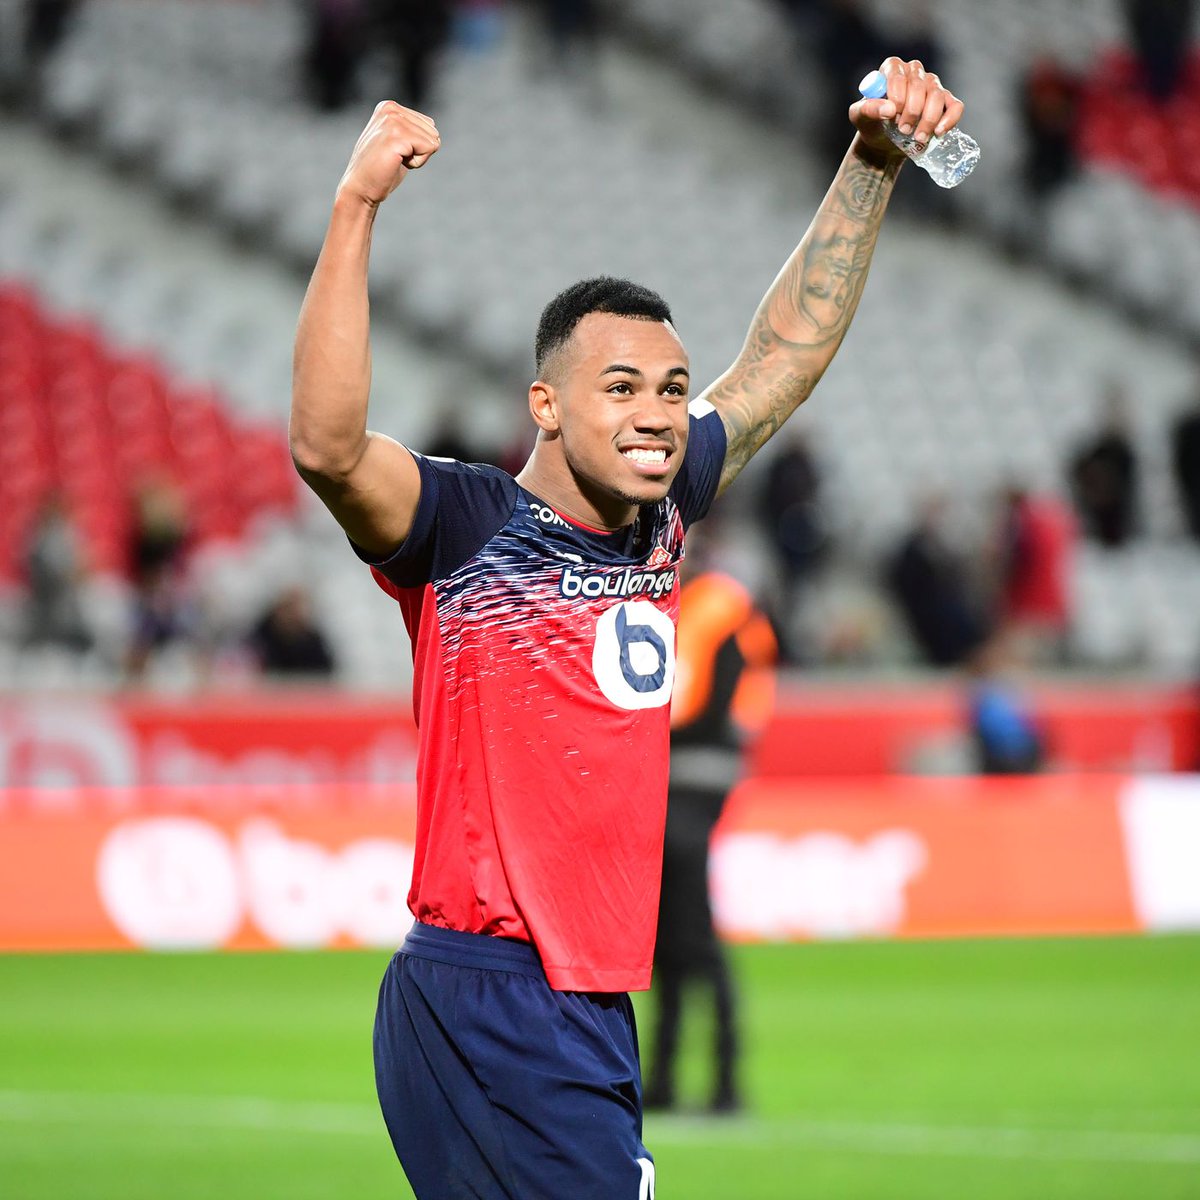 Day 17 Date - 24th July, 2020• United have asked to be kept informed of any offers made for Gabriel Magalhaes. Lille value him at over €25m. Napoli want to sign him as a replacement for Koulibaly.Source - Duncan Castles via  @utdreport Tier - 2/3My rating - /